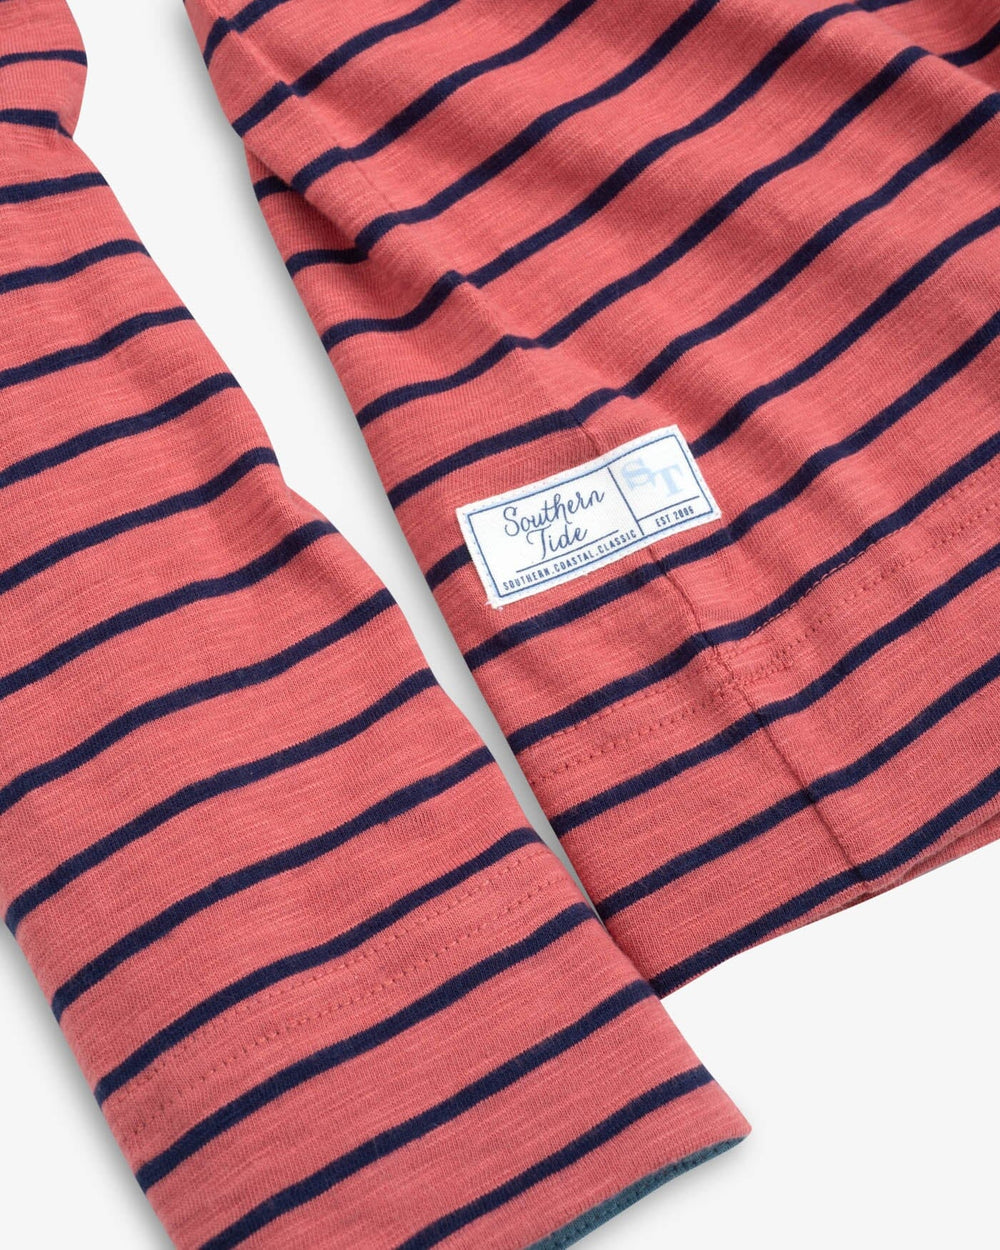 The detail view of the Southern Tide Kimmy Stripe Crew Neck Long Sleeve T-Shirt by Southern Tide - Dusty Coral